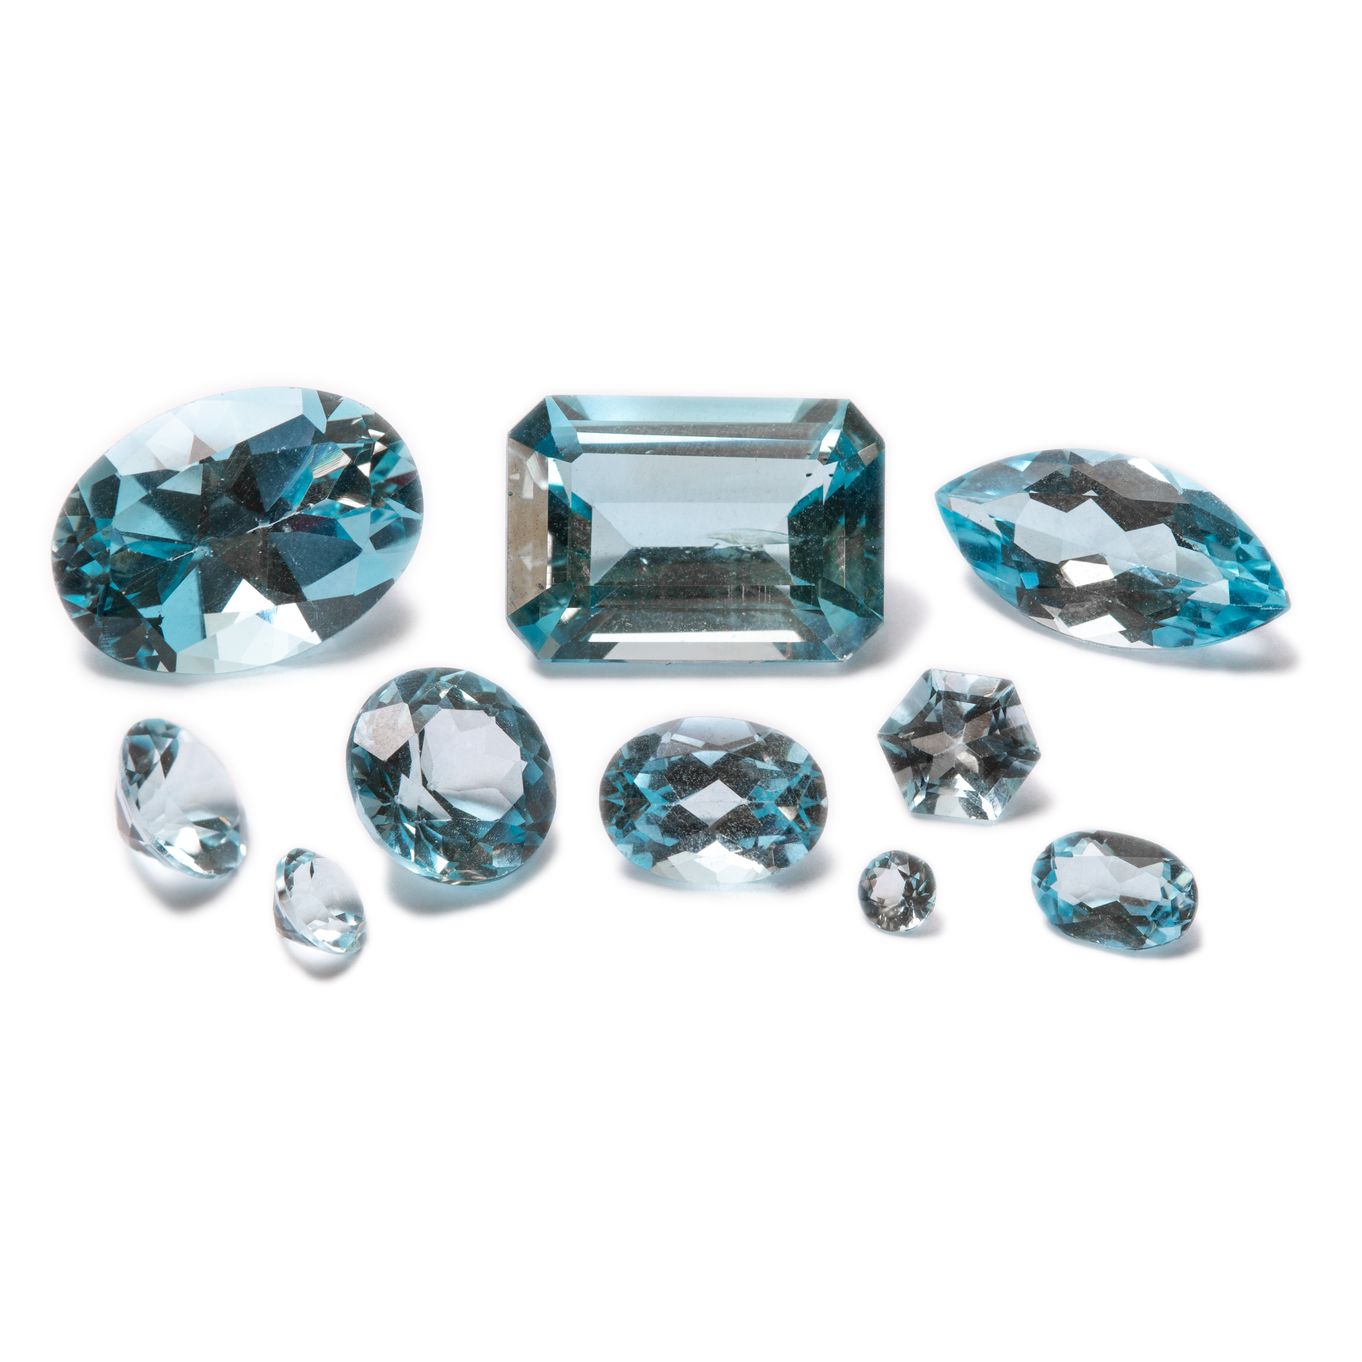 Types Of Diamonds For Jewellery Making